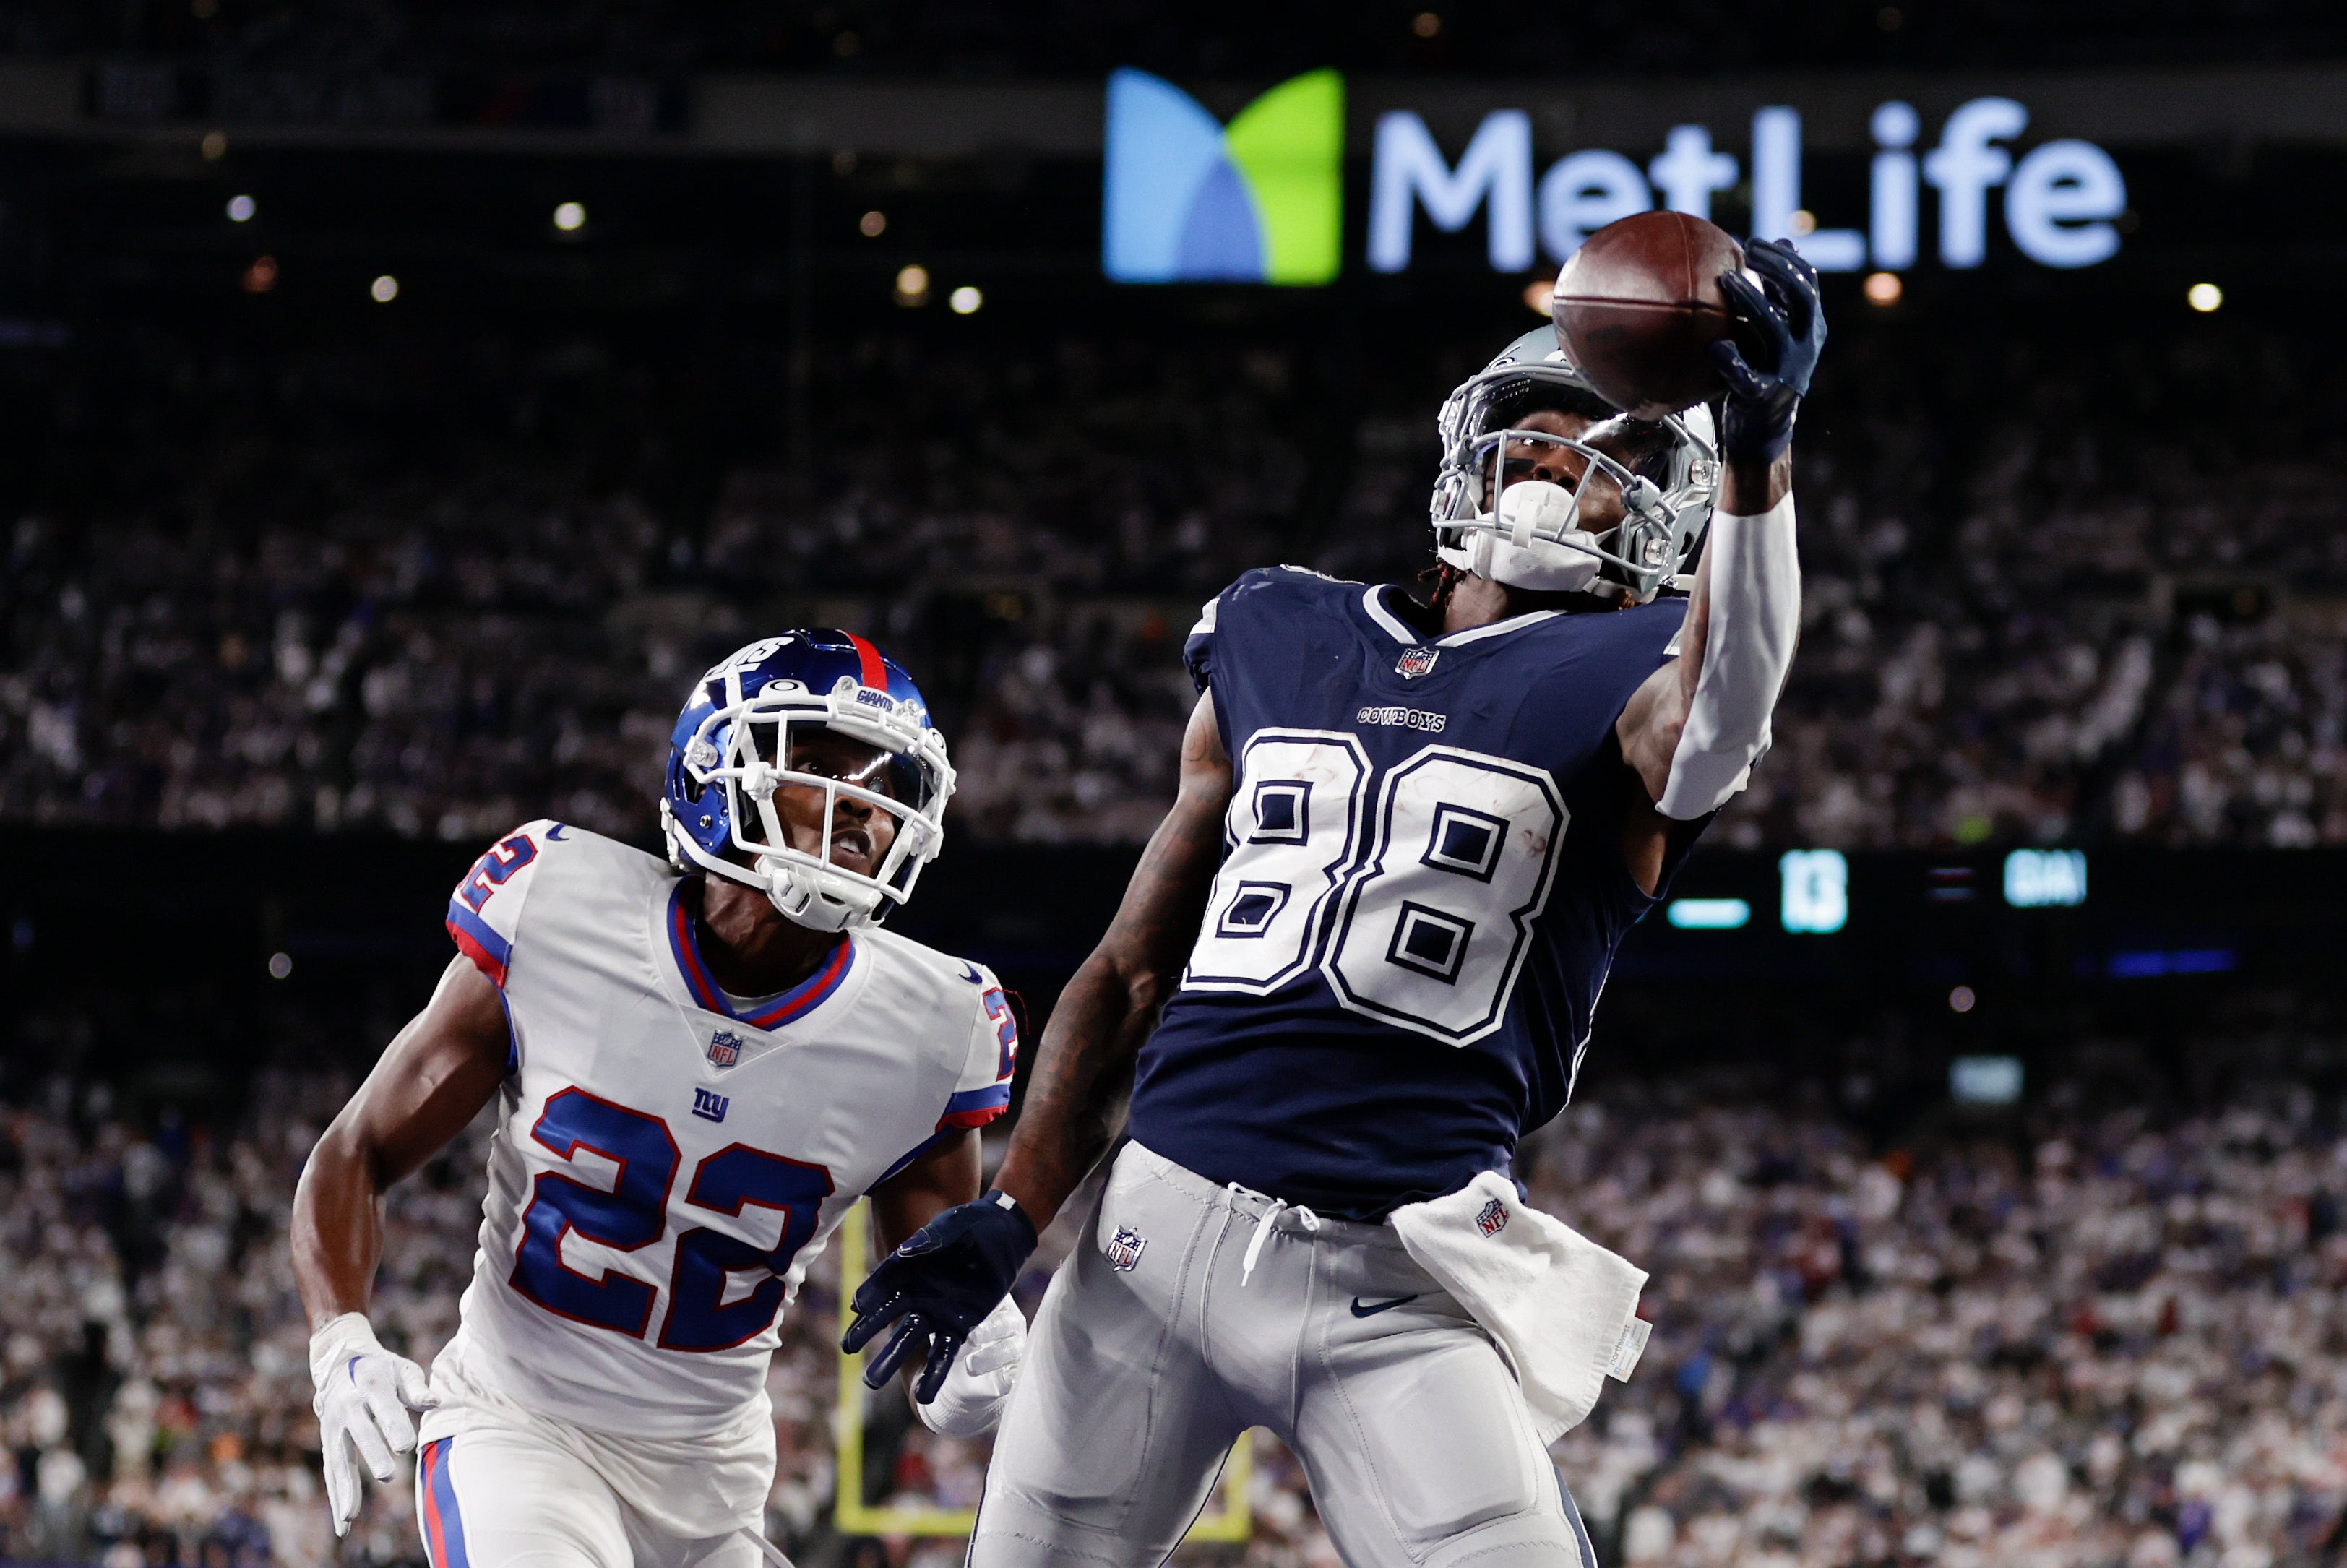 A spectacular one-handed touchdown catch from wide receiver CeeDee Lamb sealed a 23-16 win for the Dallas Cowboys over the New York Giants (Adam Hunger/AP)